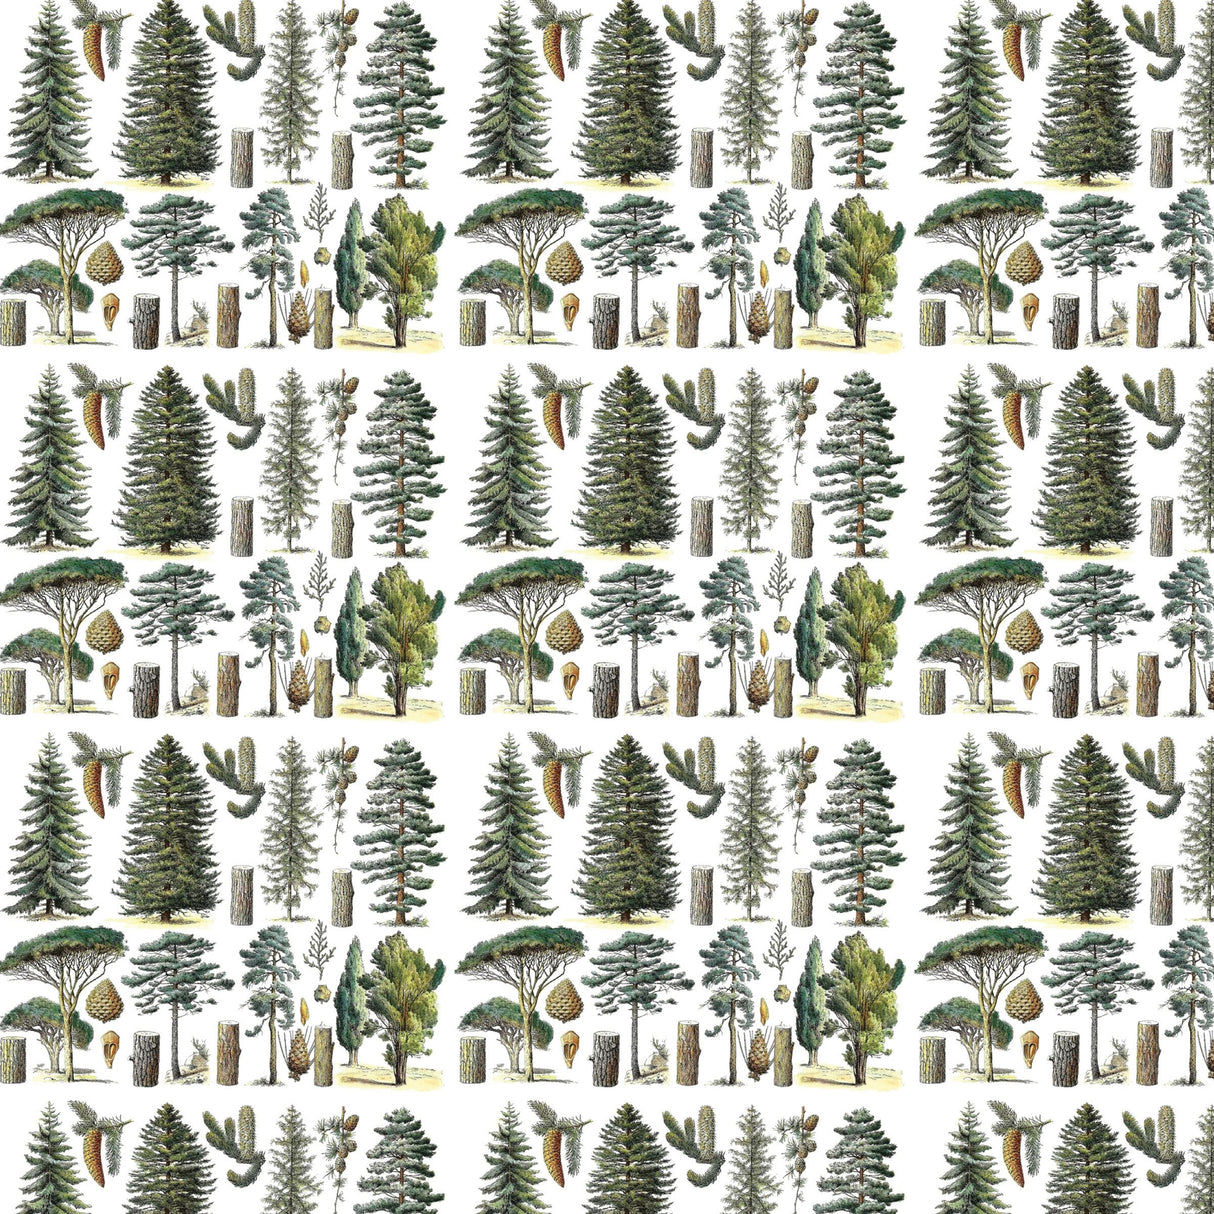 Conifer Forest Gift Wrap - Fairhope Graphics